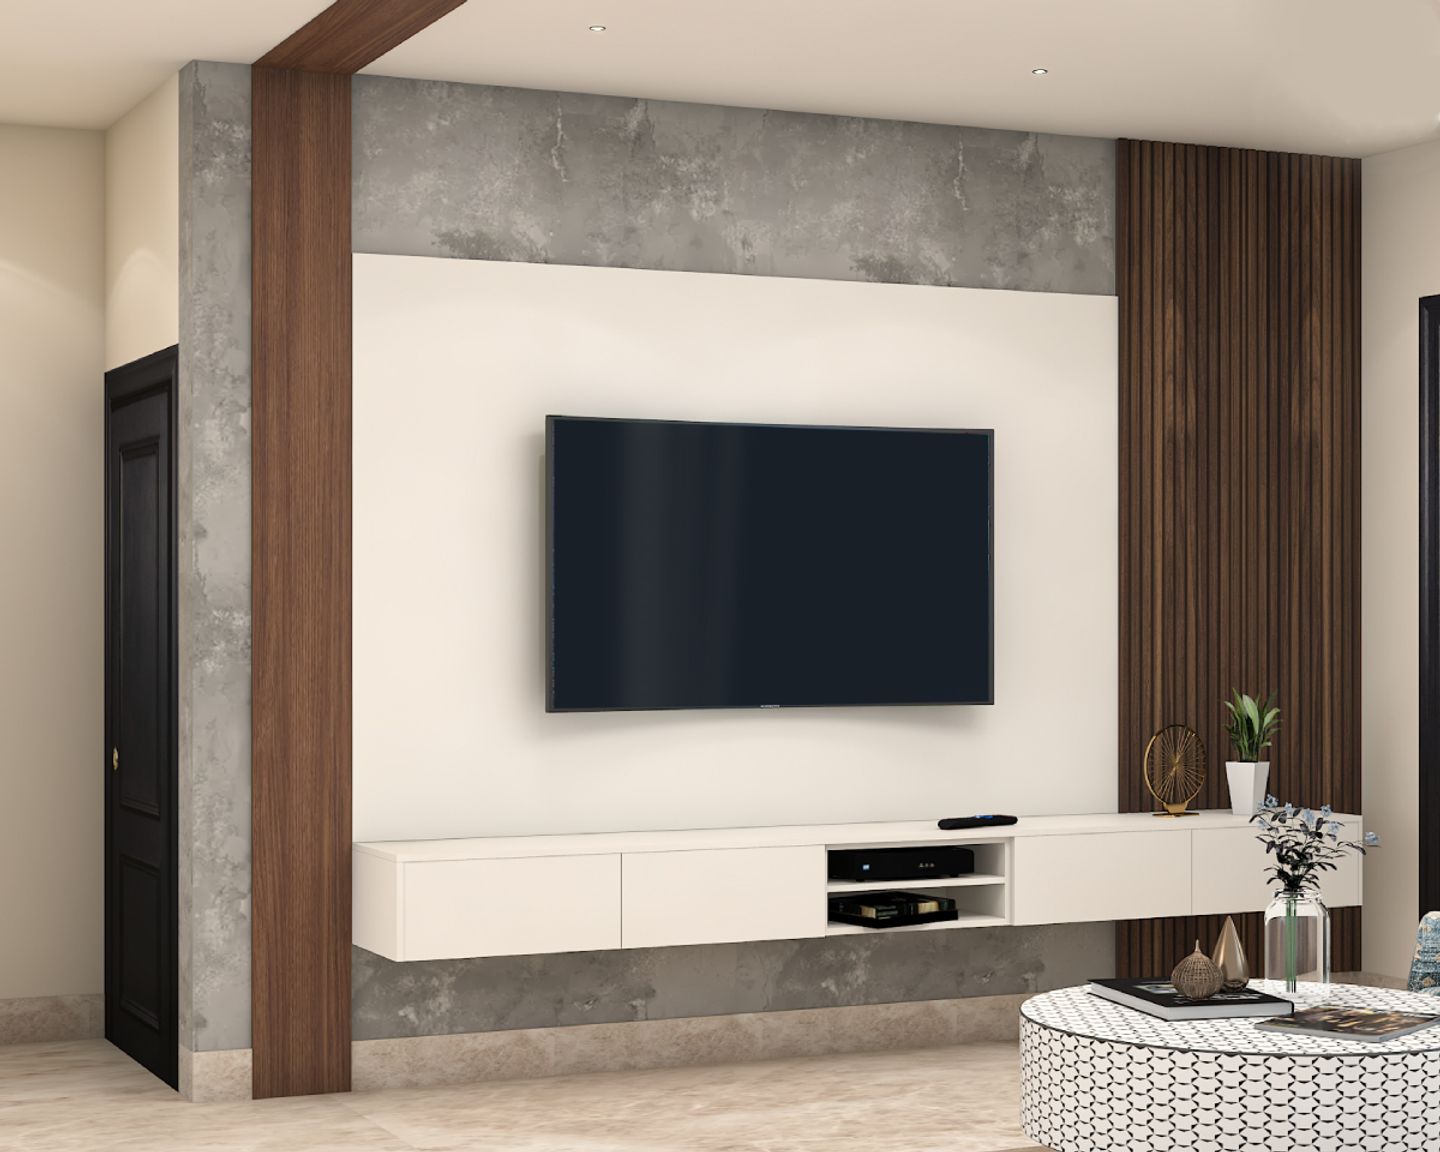 TV Unit With Grey Wall And Wooden Panel - Livspace